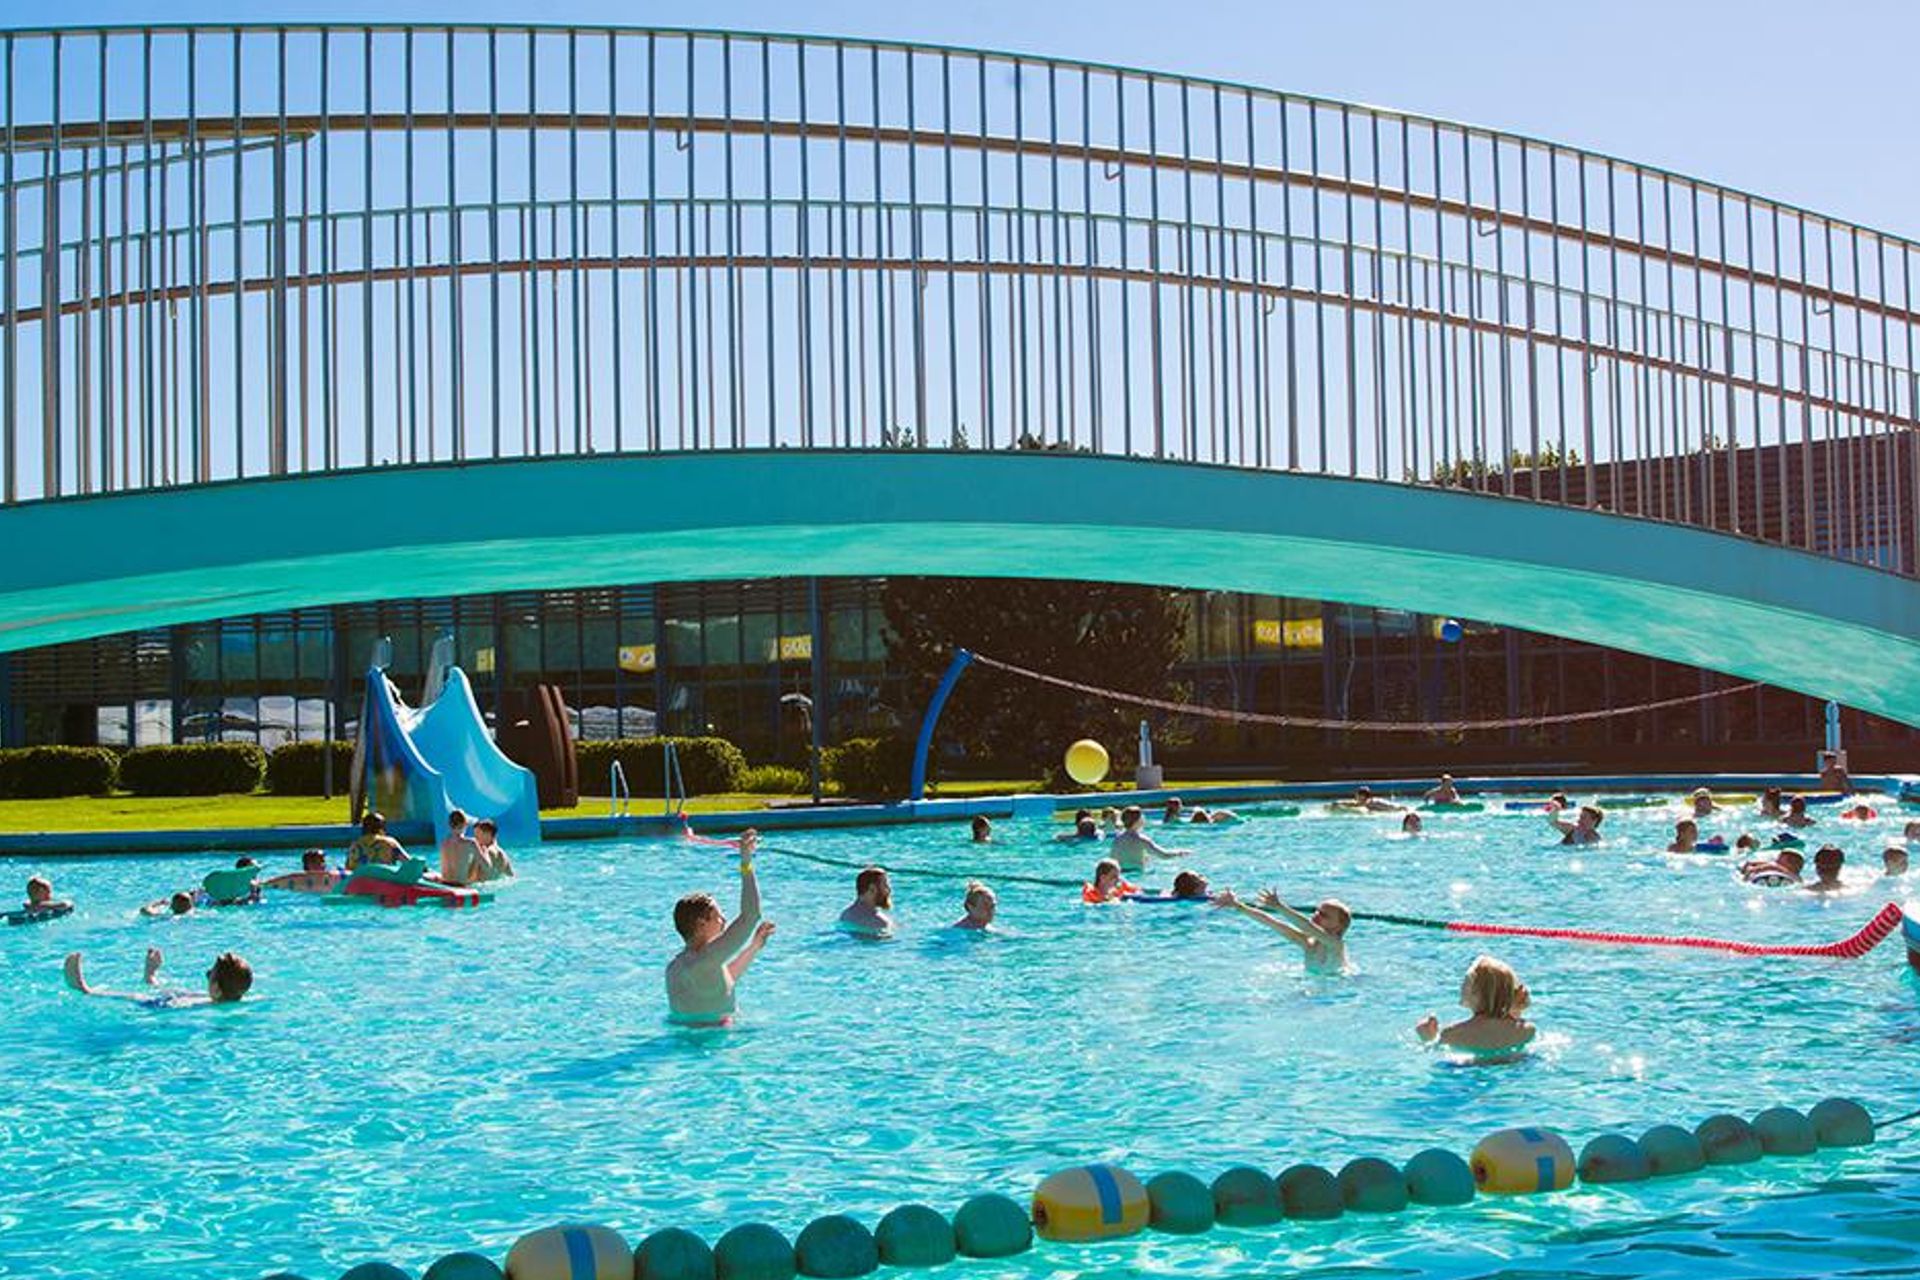 people enjoying the summer sun and the large Laugardalslaug pool, which offers a multitude of games